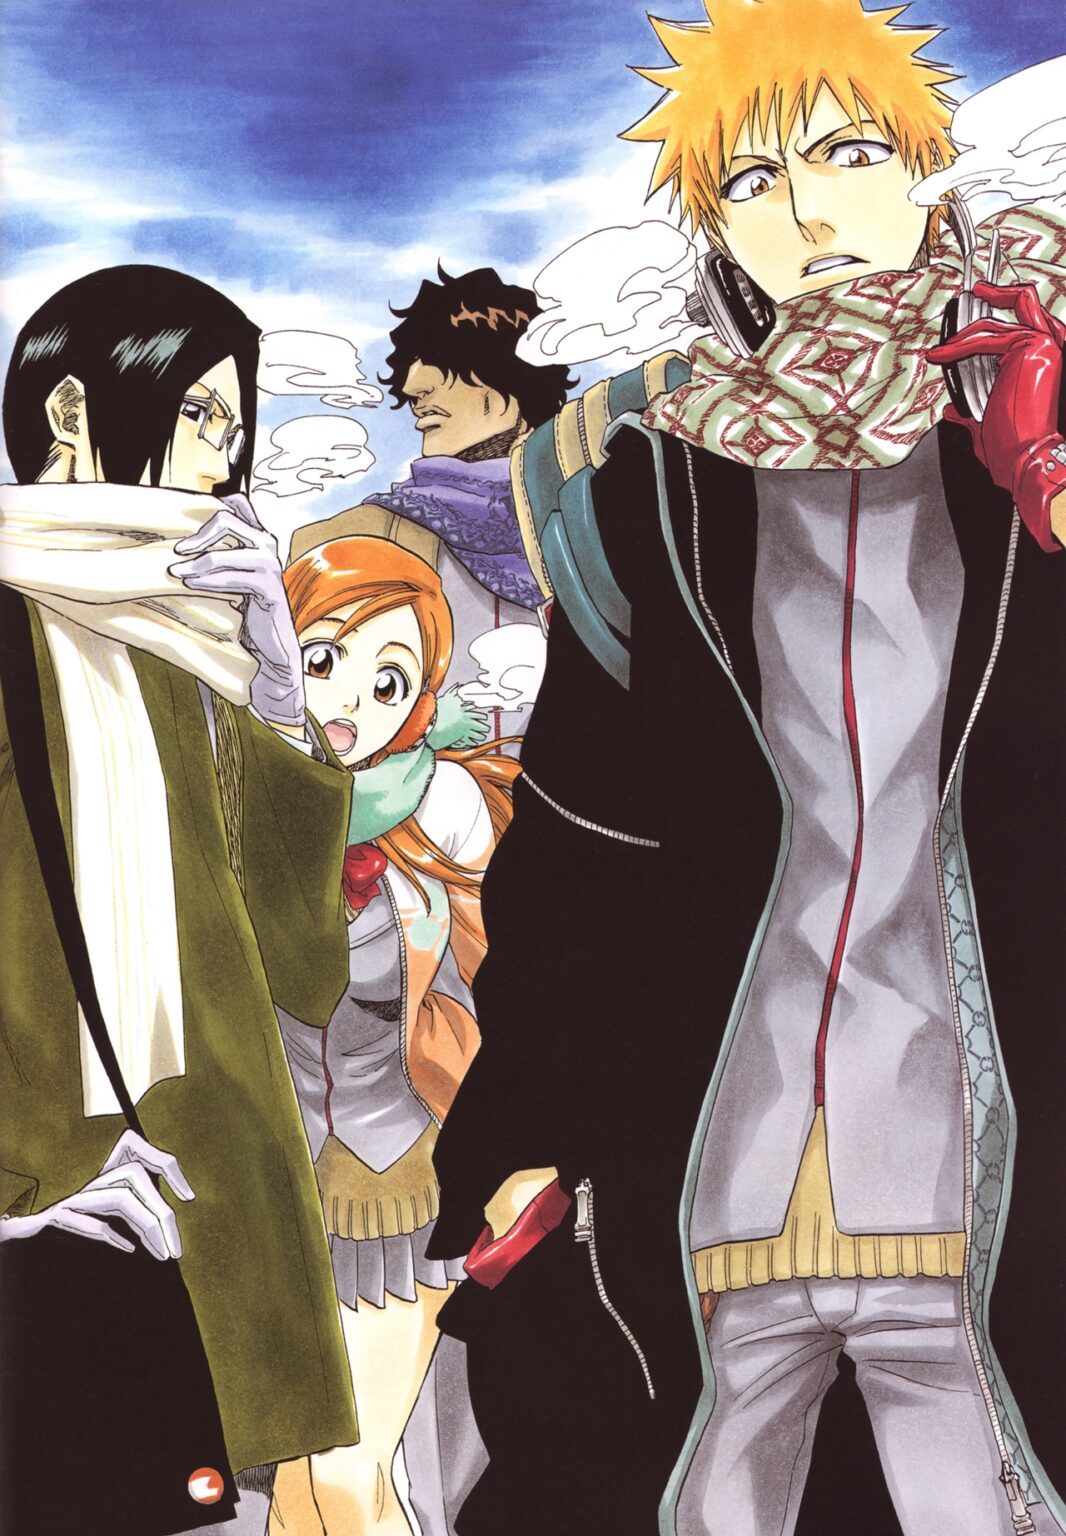 Bleach manga will have a new chapter in August - A little of Everything